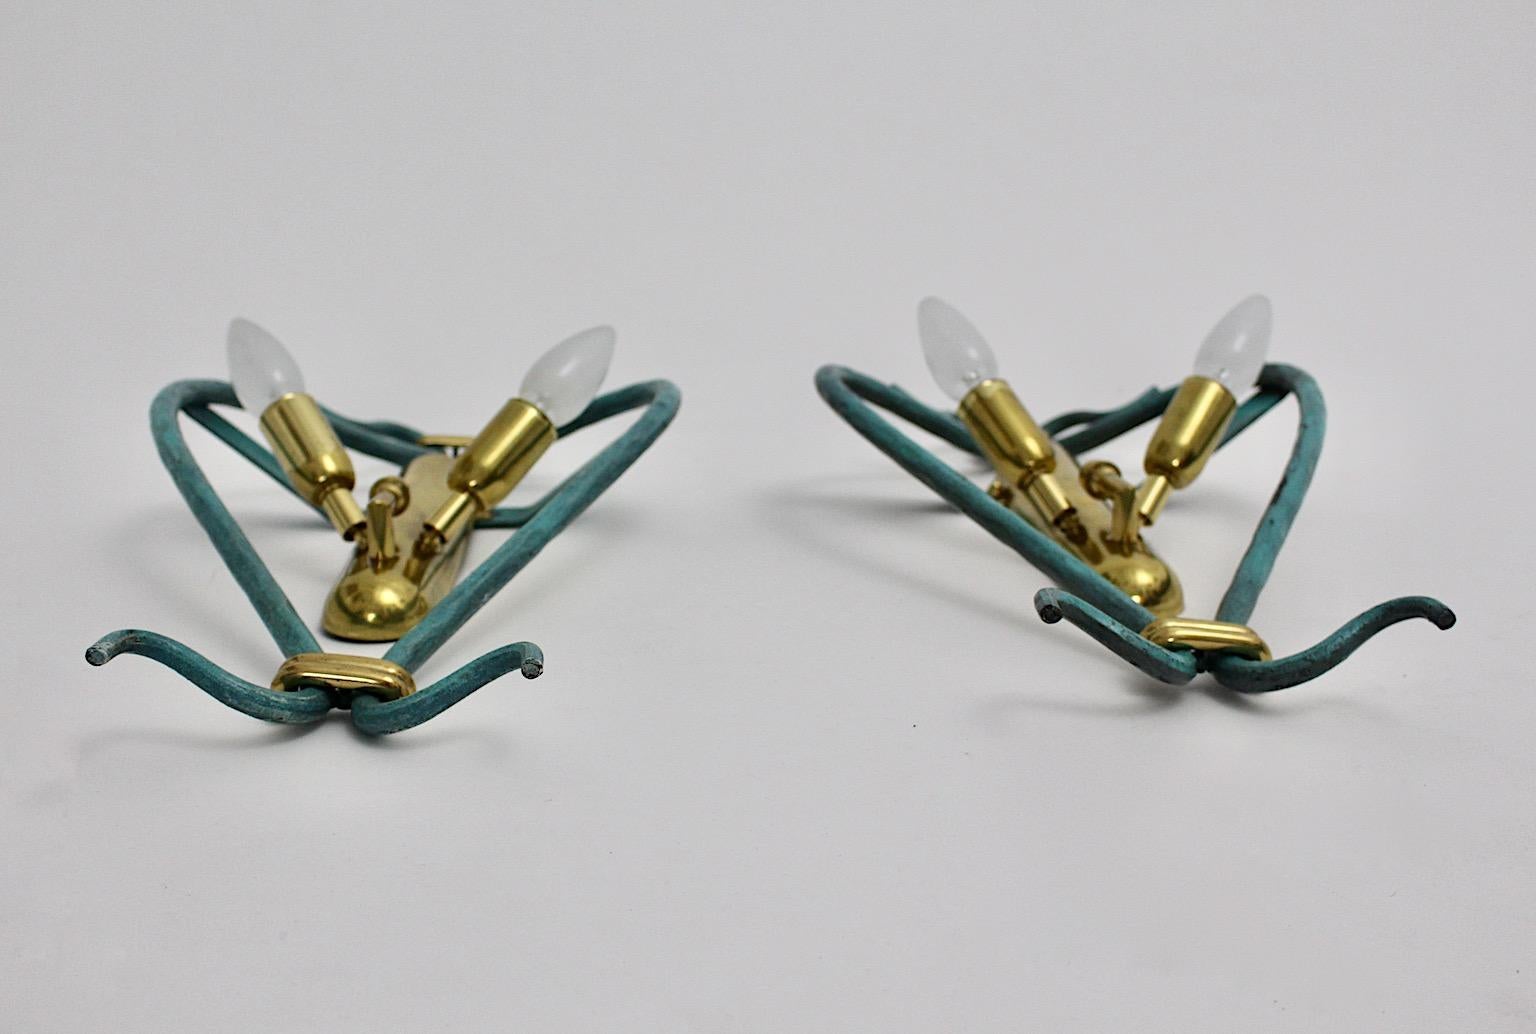 Italian Pair of Mid-Century Modern Vintage Blue Sconces with Brass Details, 1960 For Sale 2